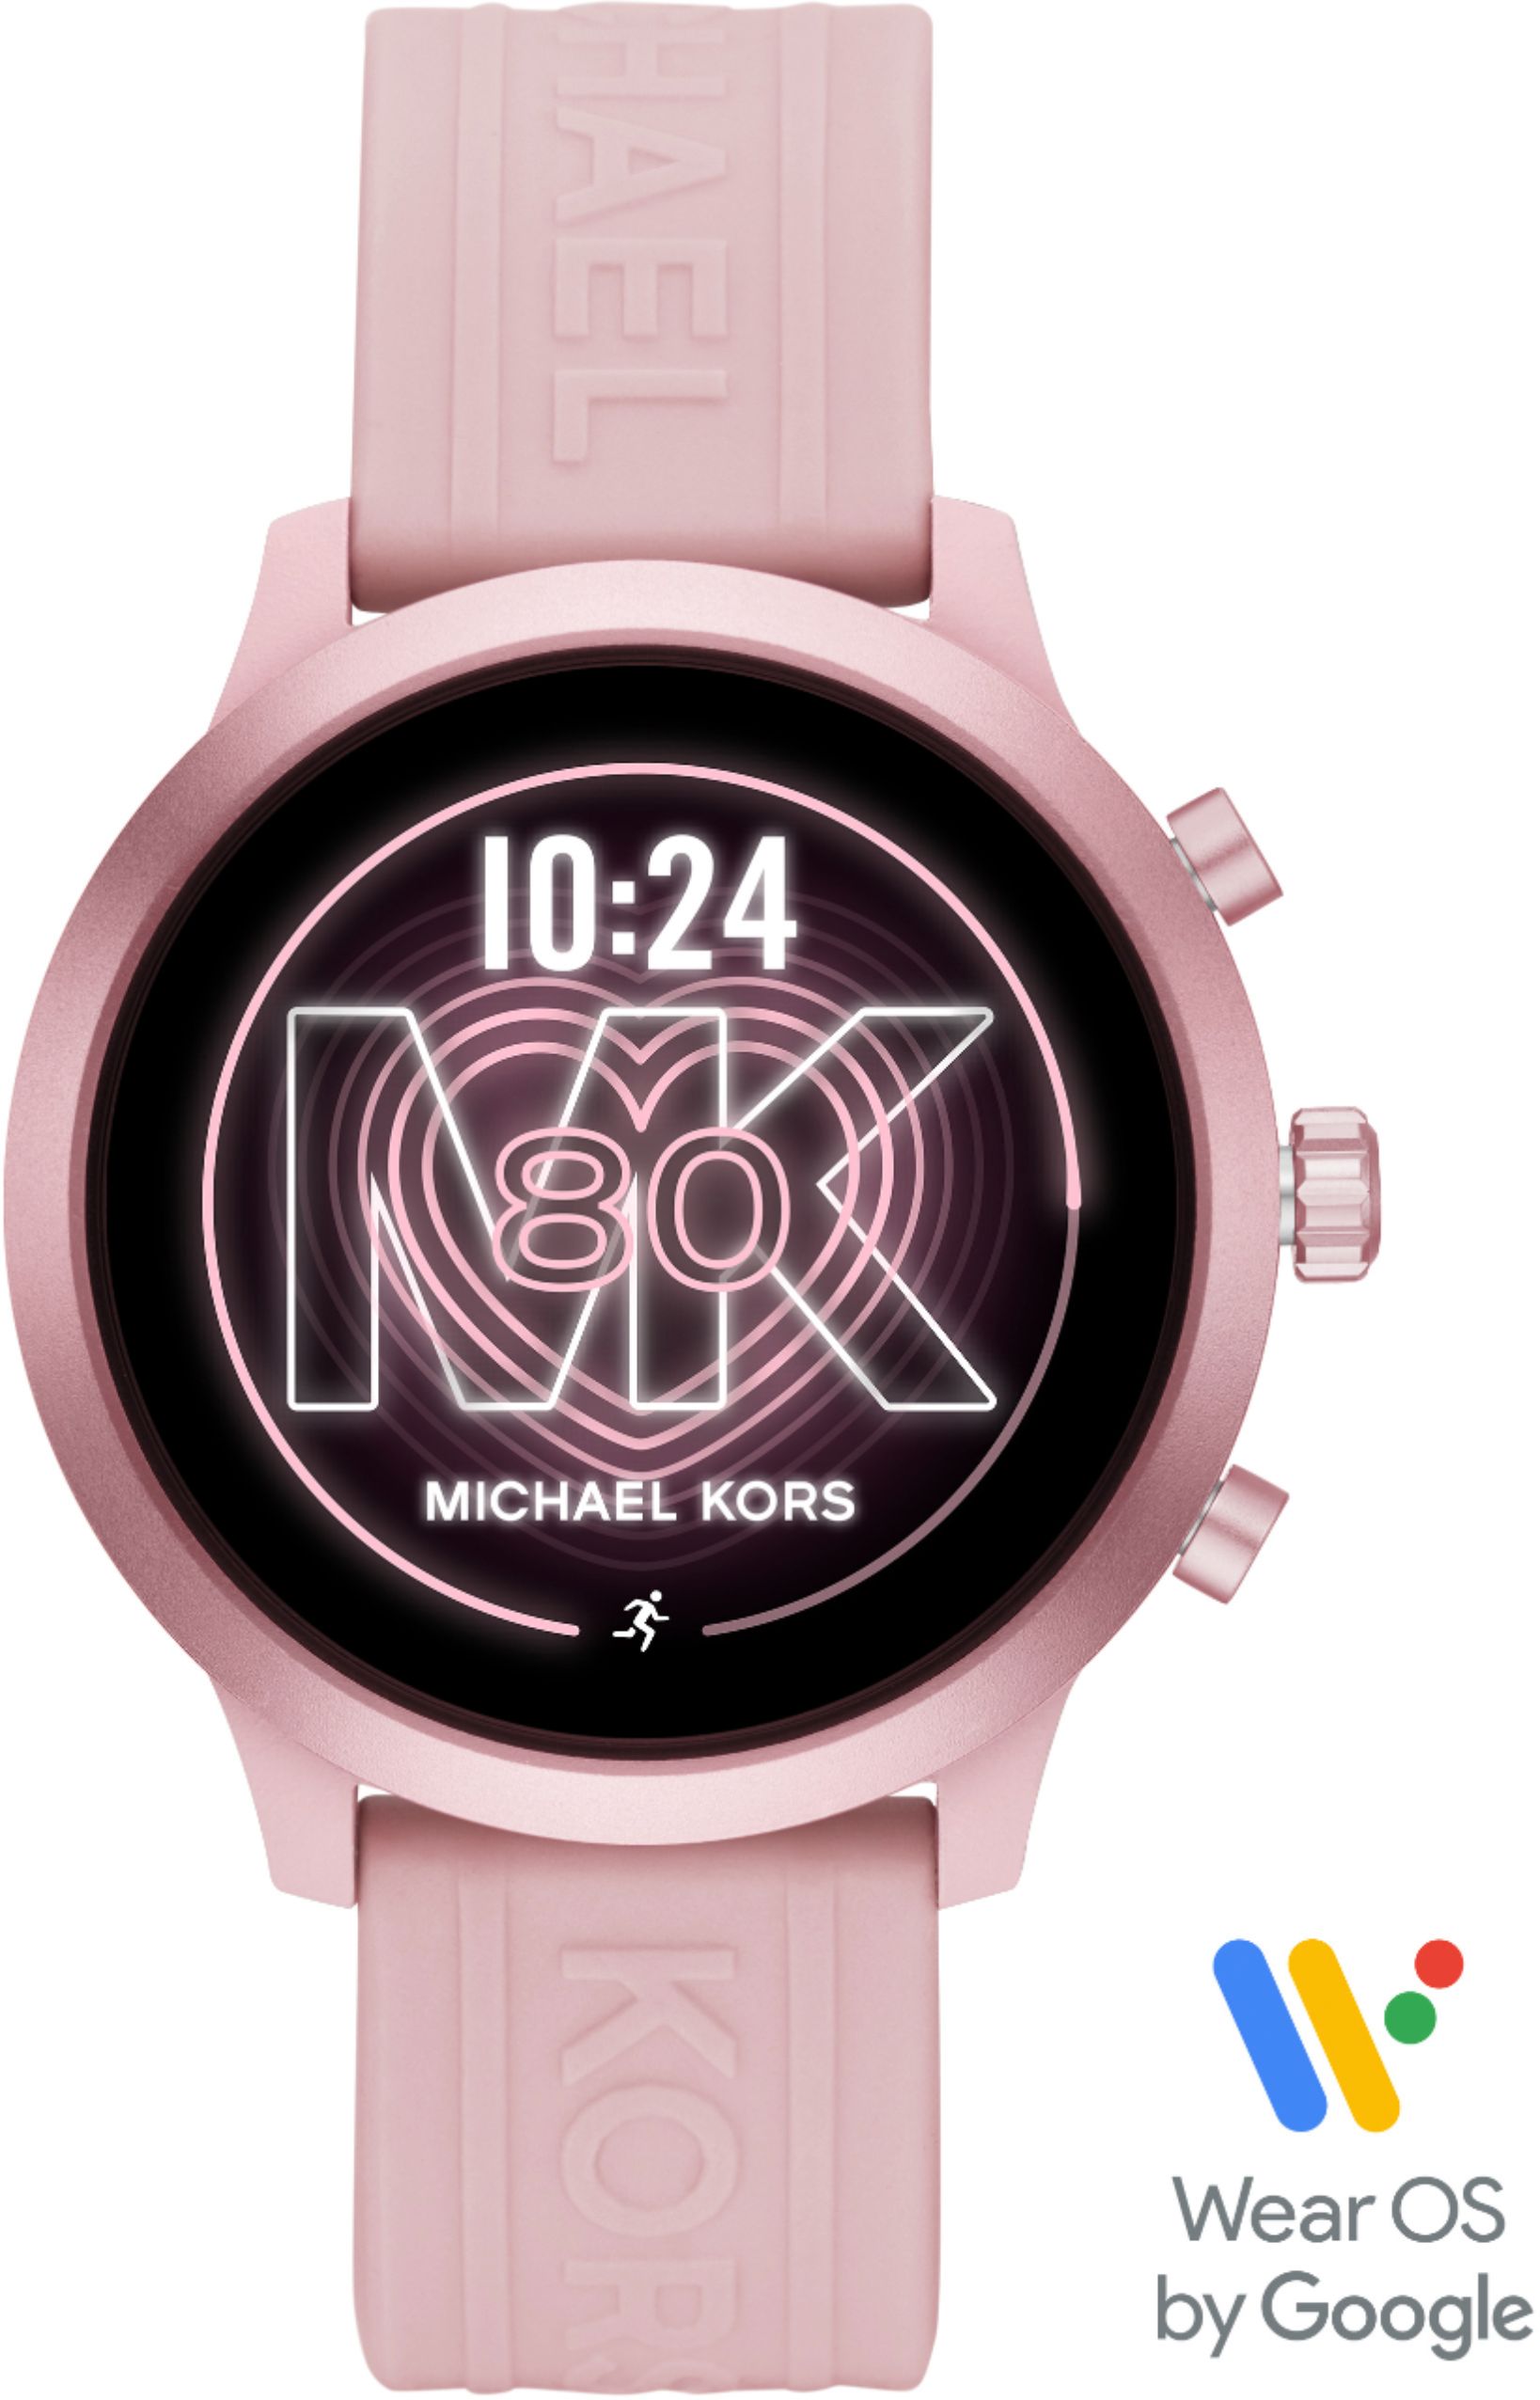 can the michael kors smartwatch text